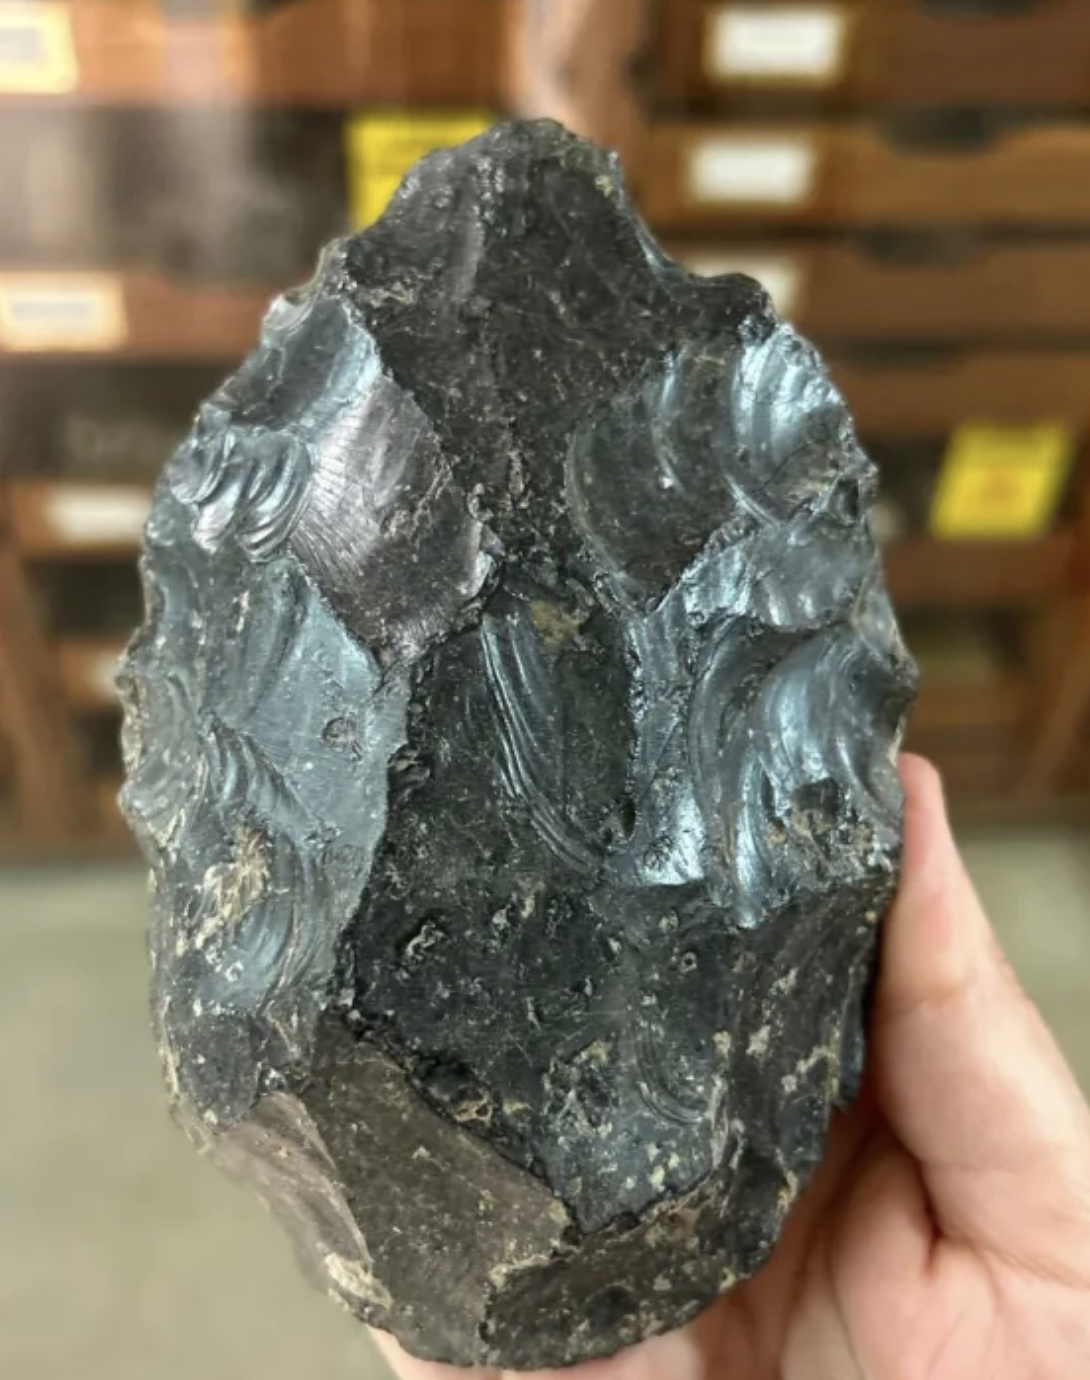 A researchers holds on of the obsidian handaxes found at the site.